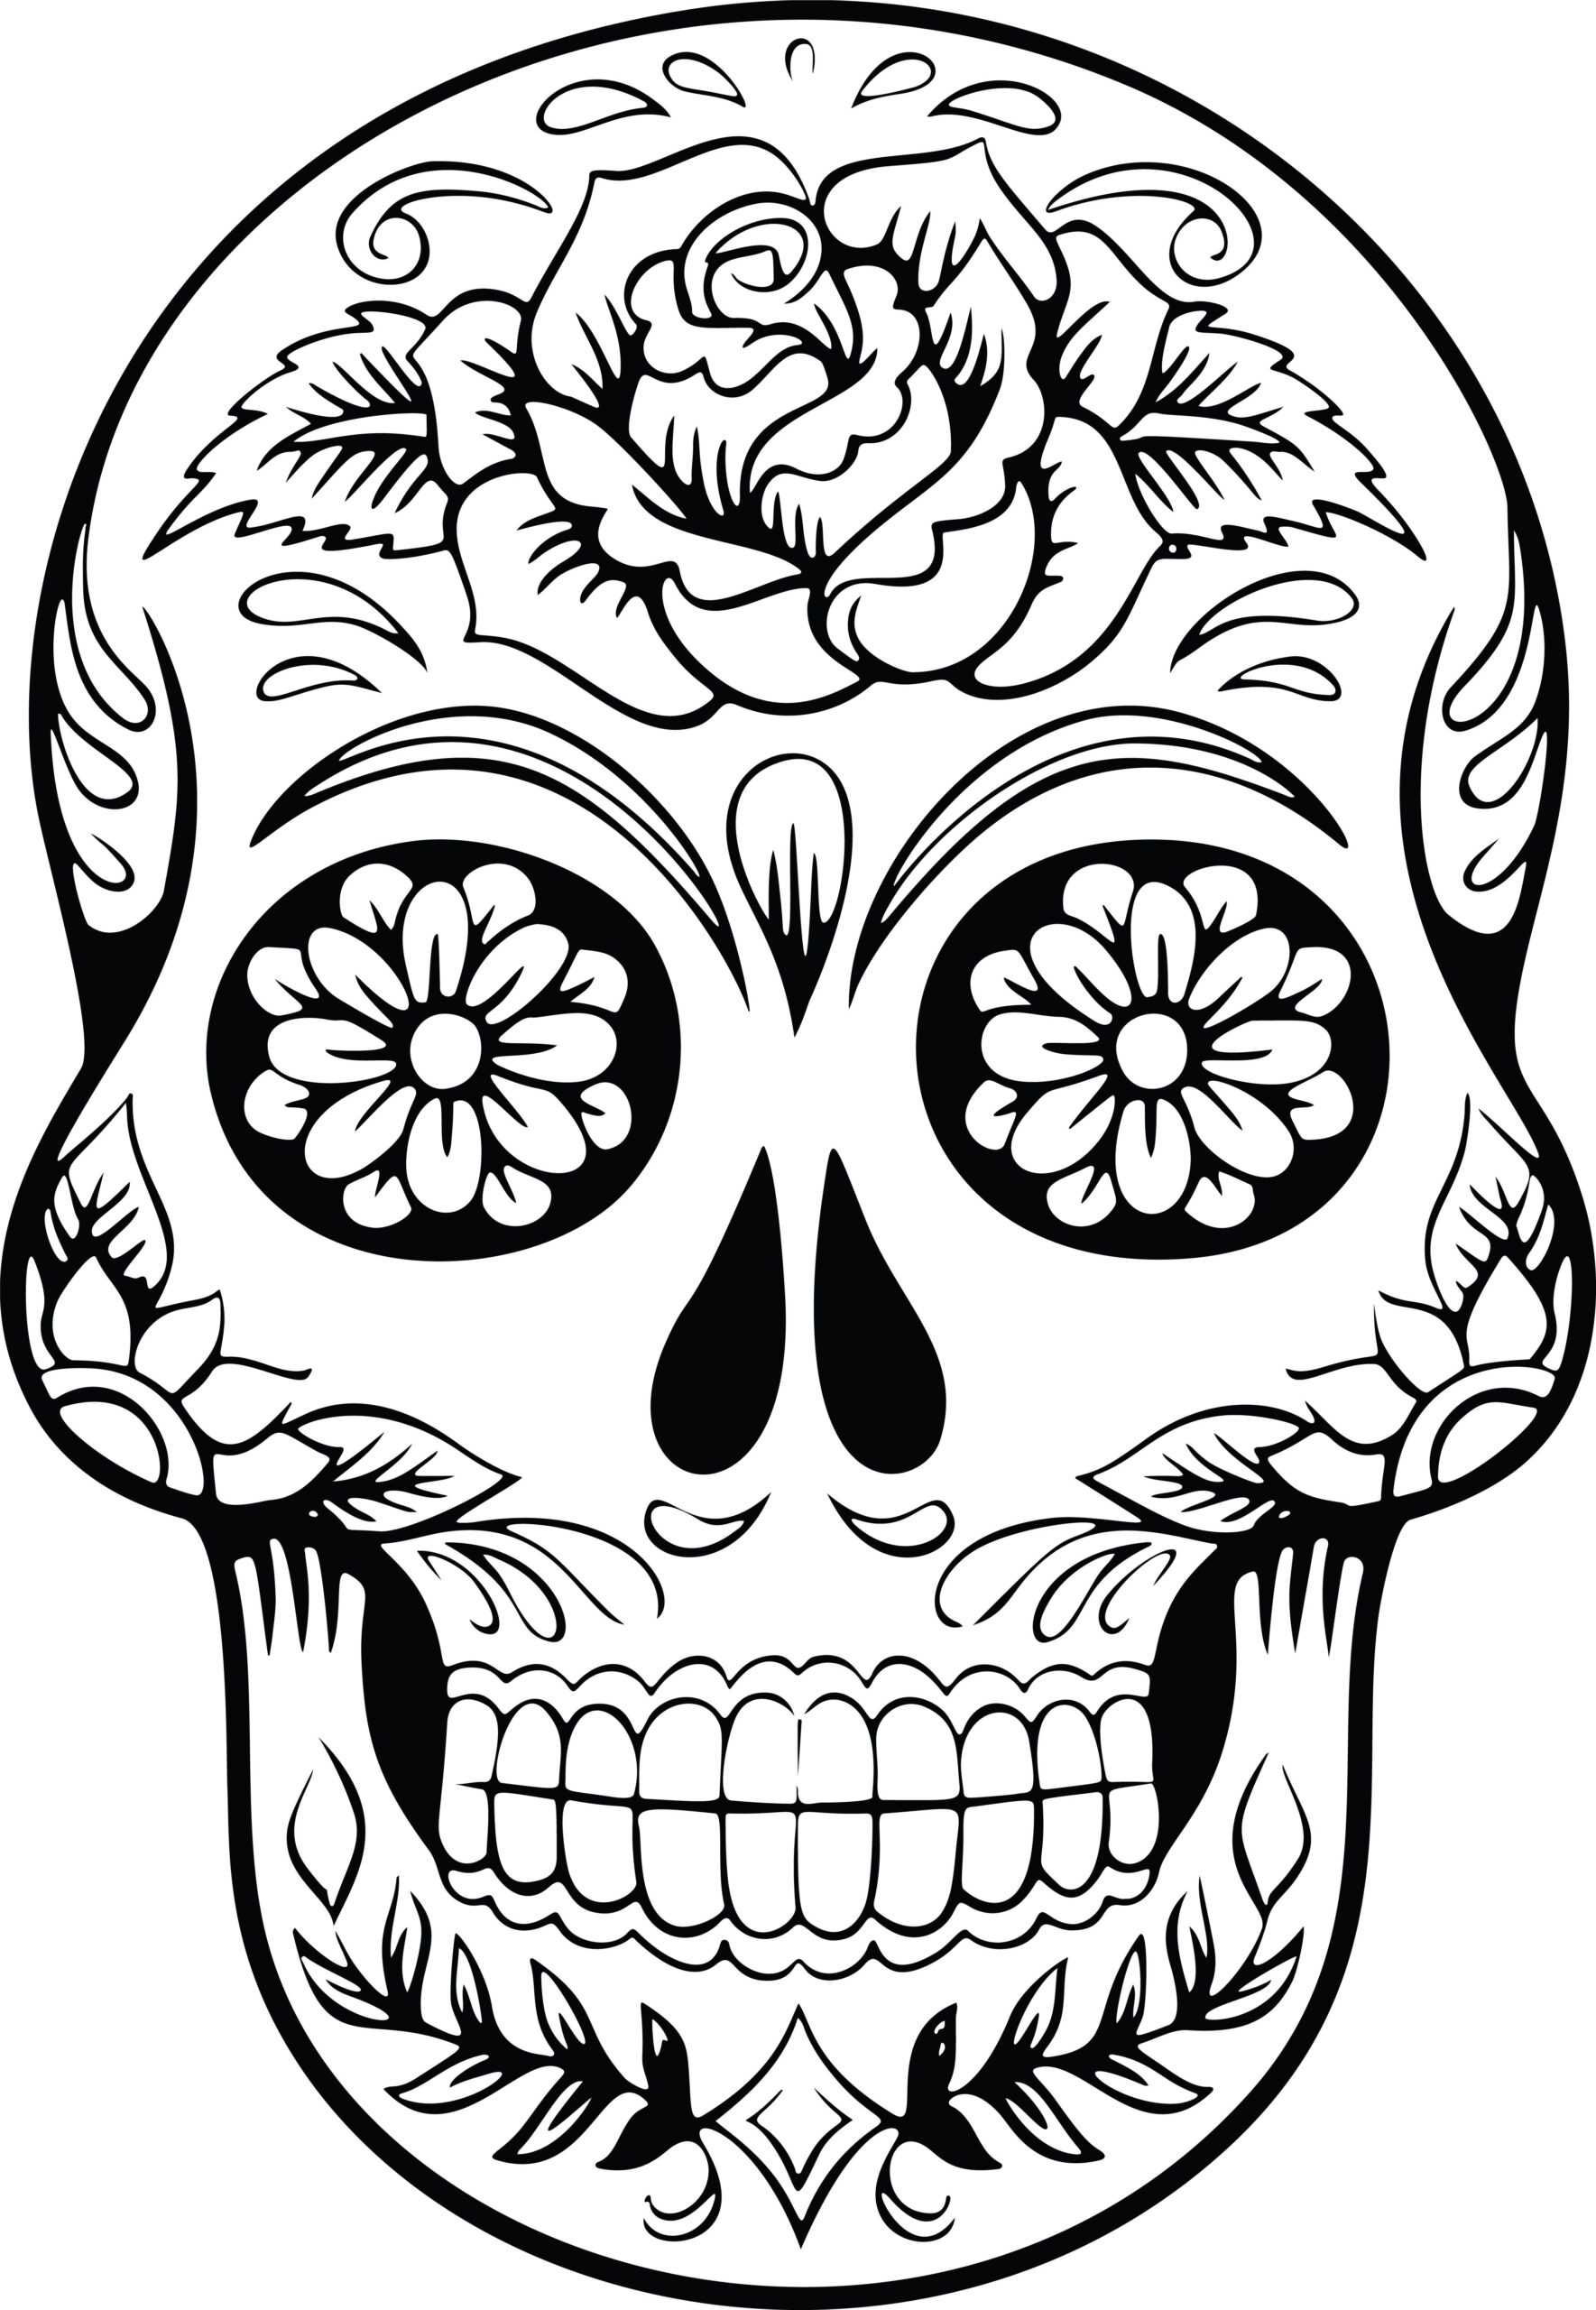 Best Coloring : Free Skull Anatomy Pages Muscular System In Blank Sugar Skull Template